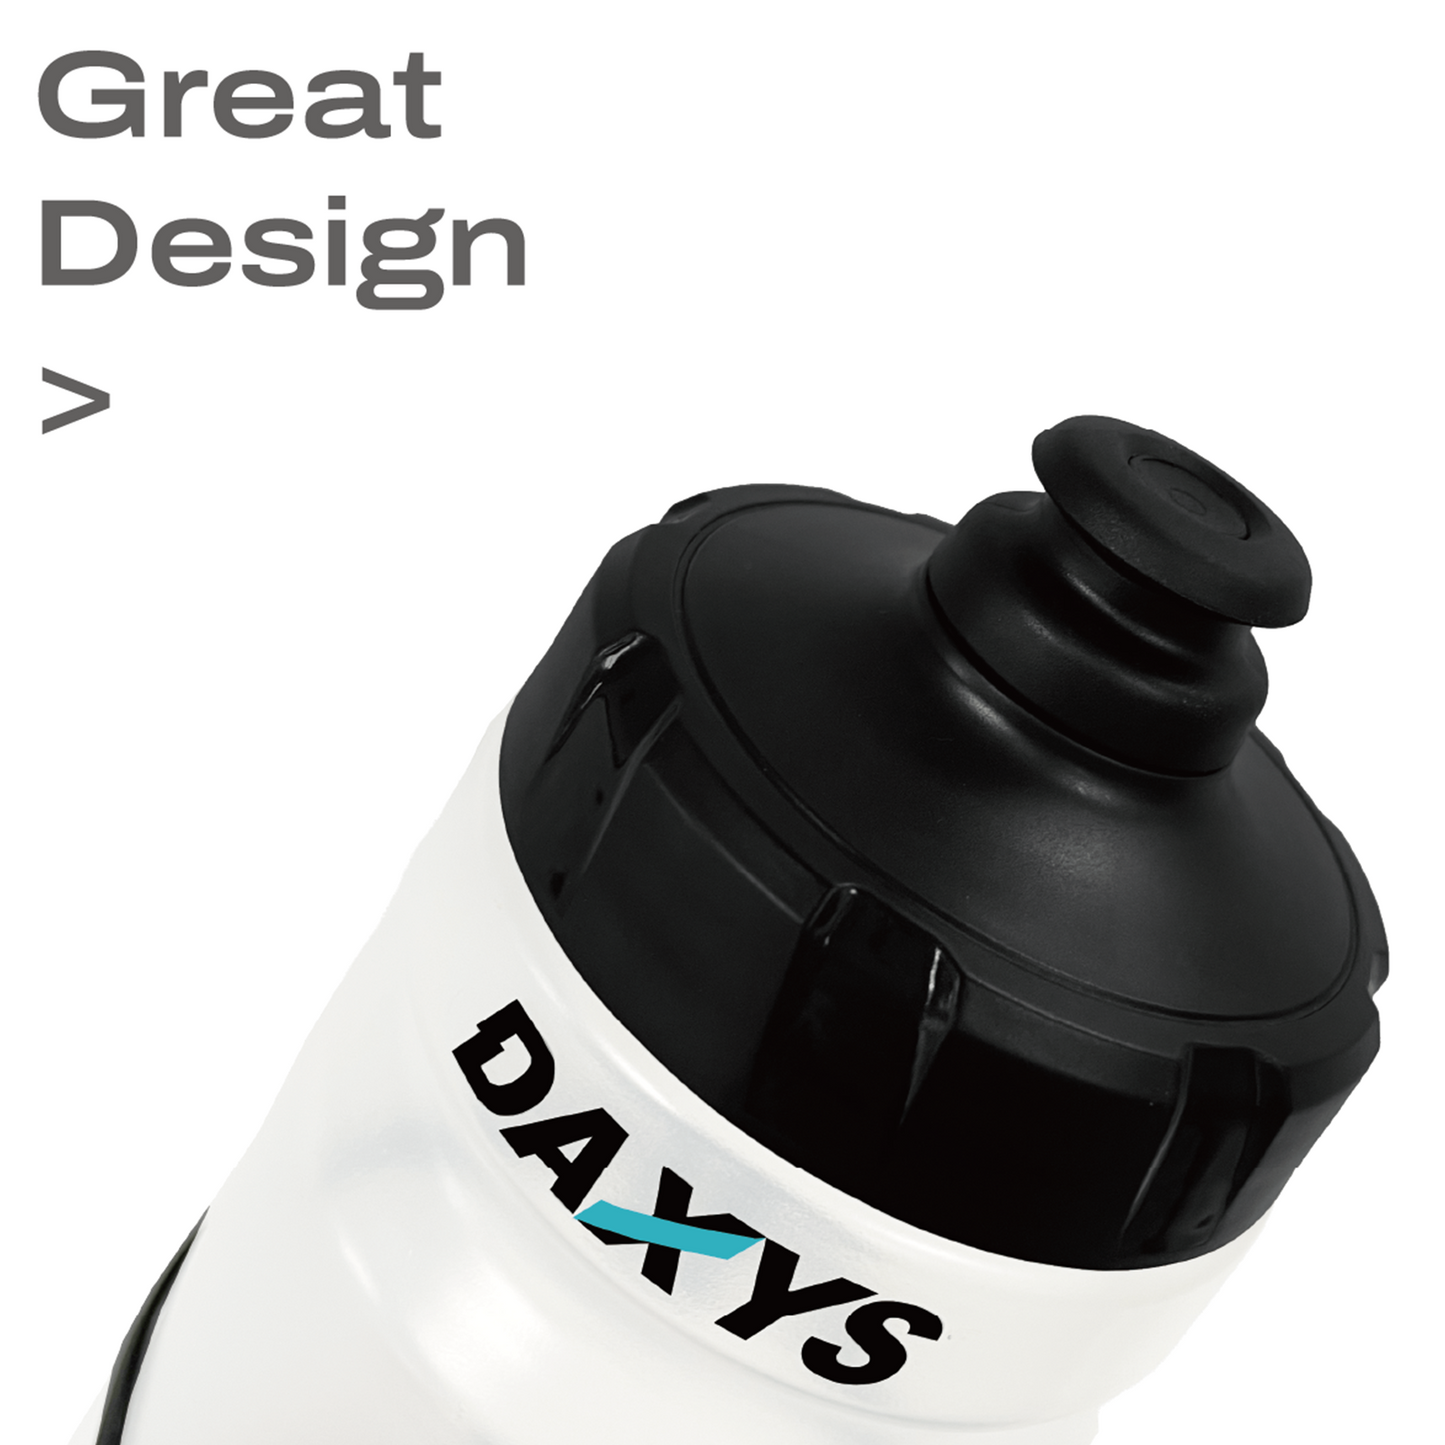 Daxys eBike Water Bottle and Holder